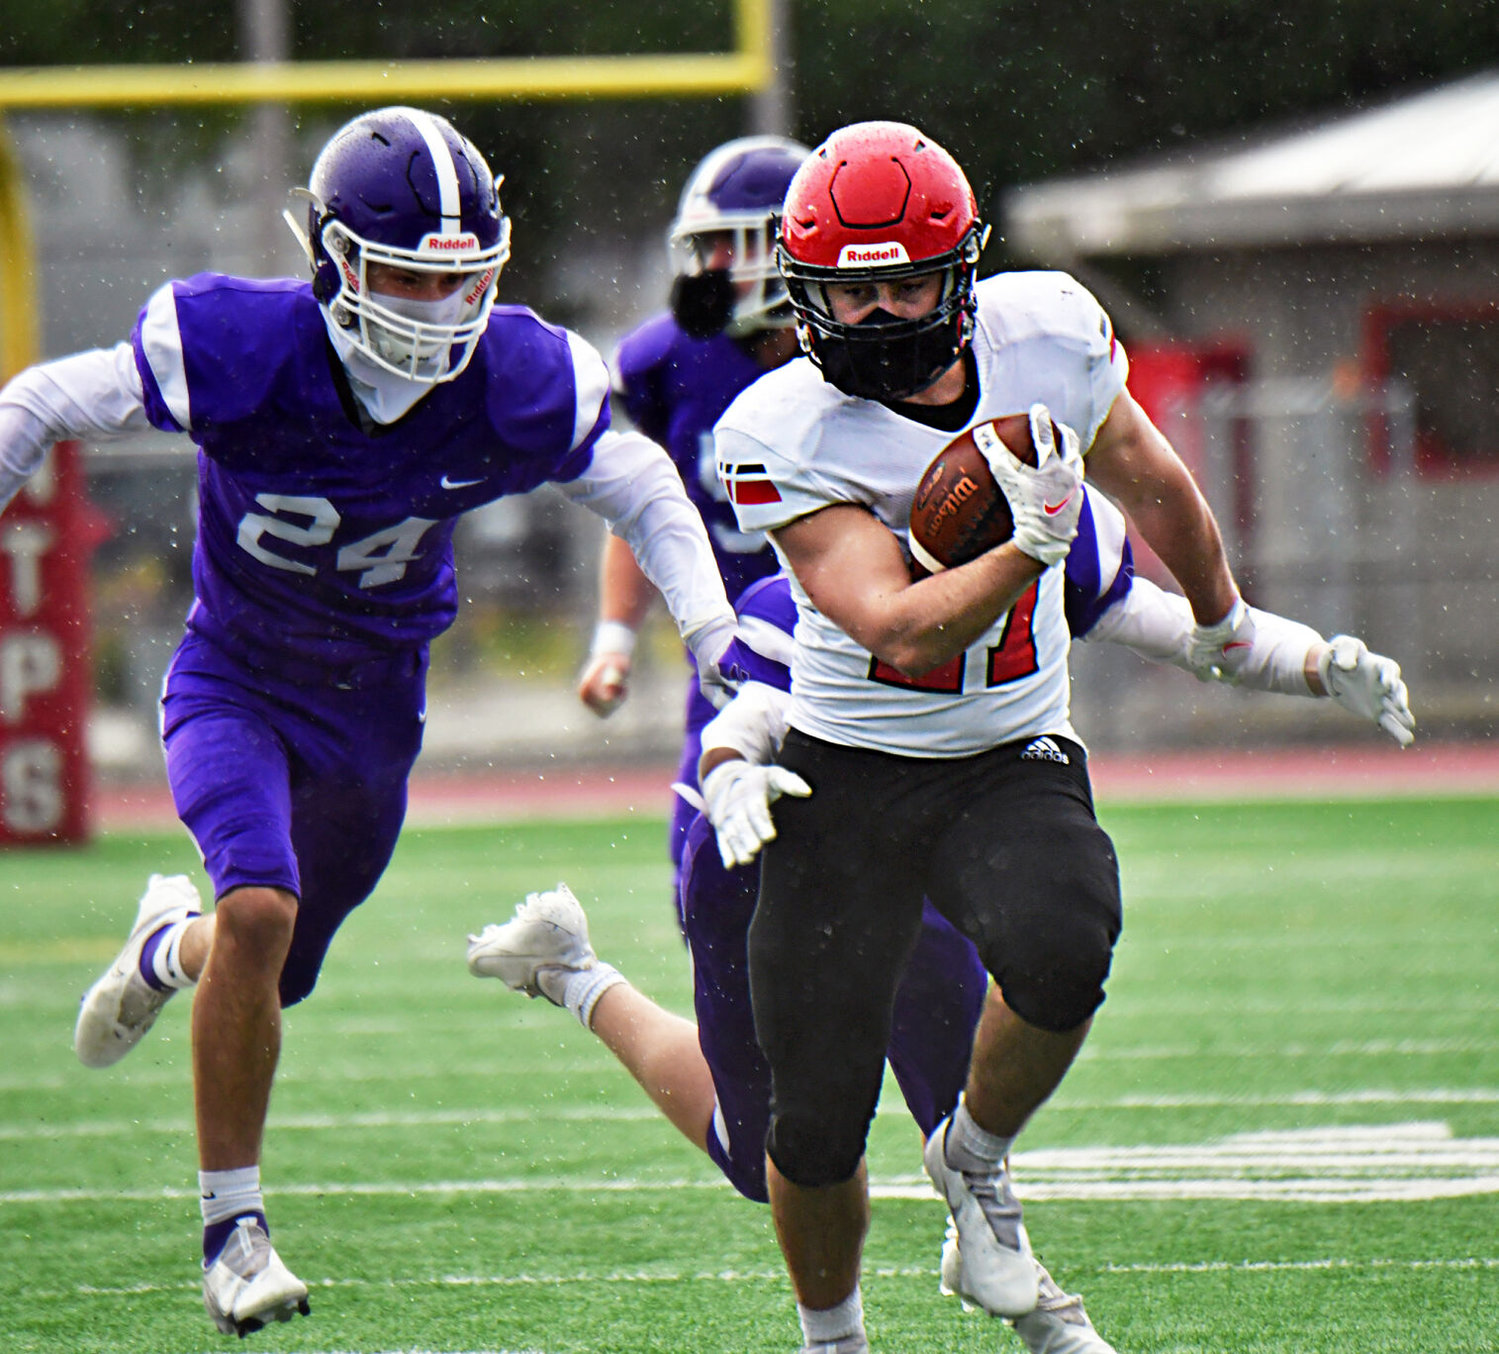 Yelm High School running back Sean Rohwedder ecludes North Thurston High School defenders as he gains good yardage on Friday, March 19, at South Sound Stadium.